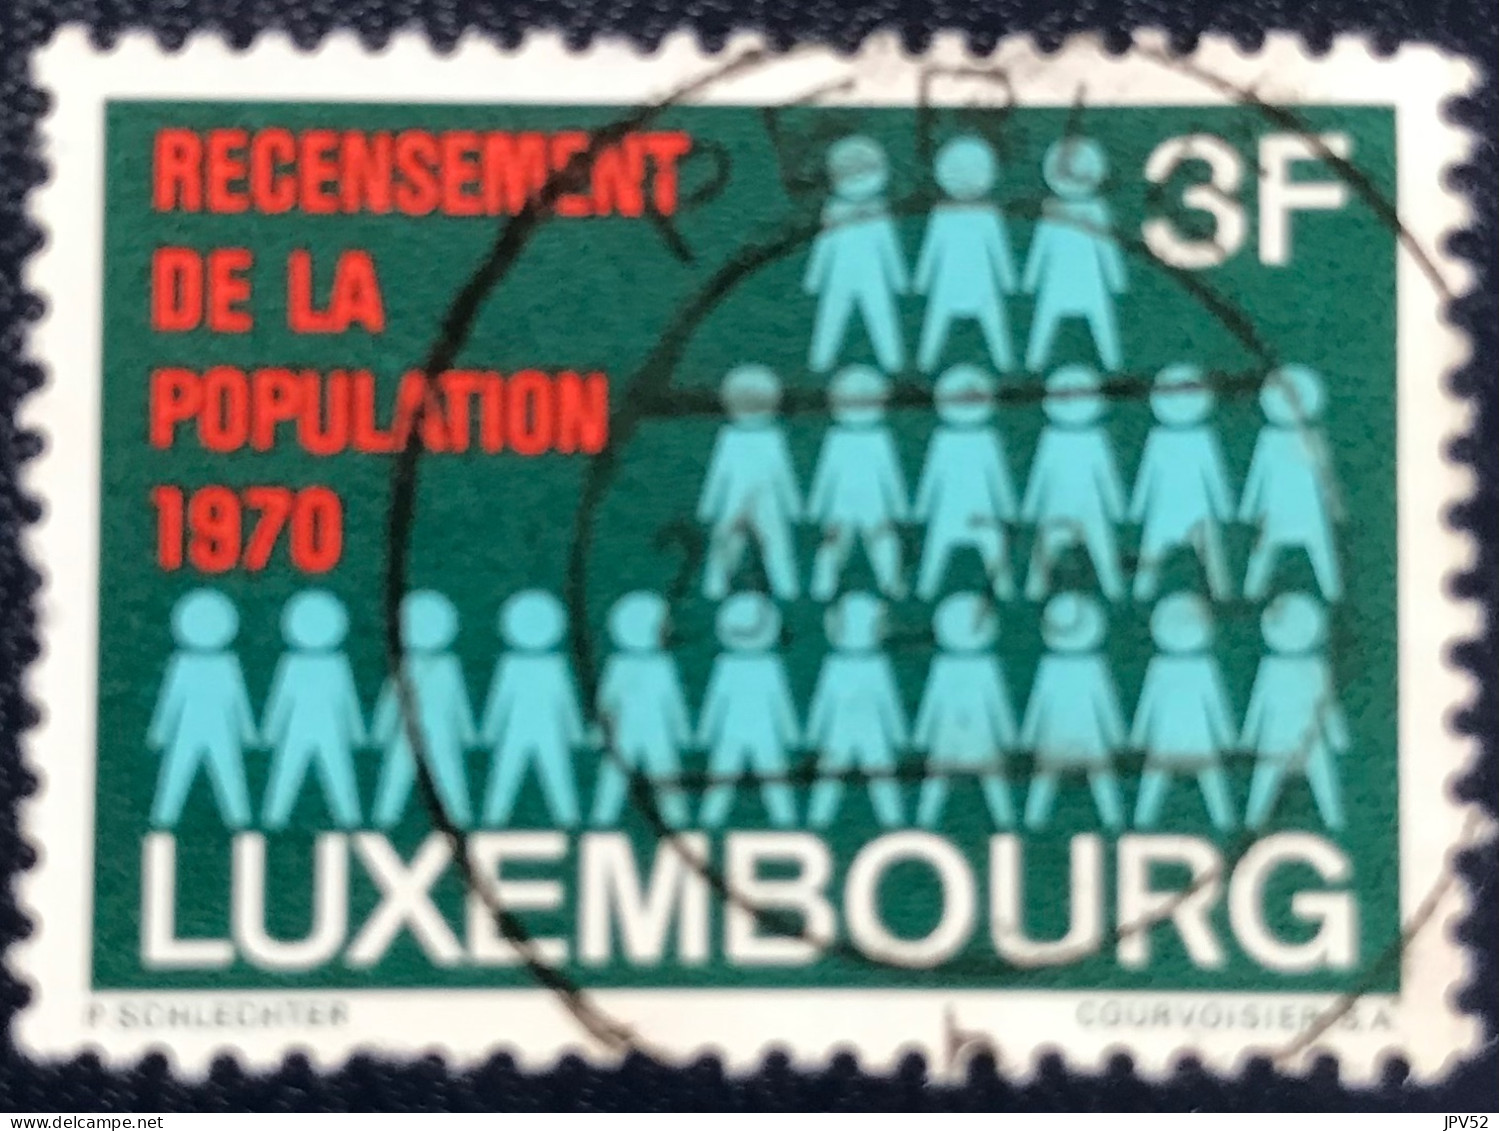 Luxembourg - Luxemburg - C18/31 - 1970 - (°)used - Michel 811 - Bevolkingspictogram - Used Stamps